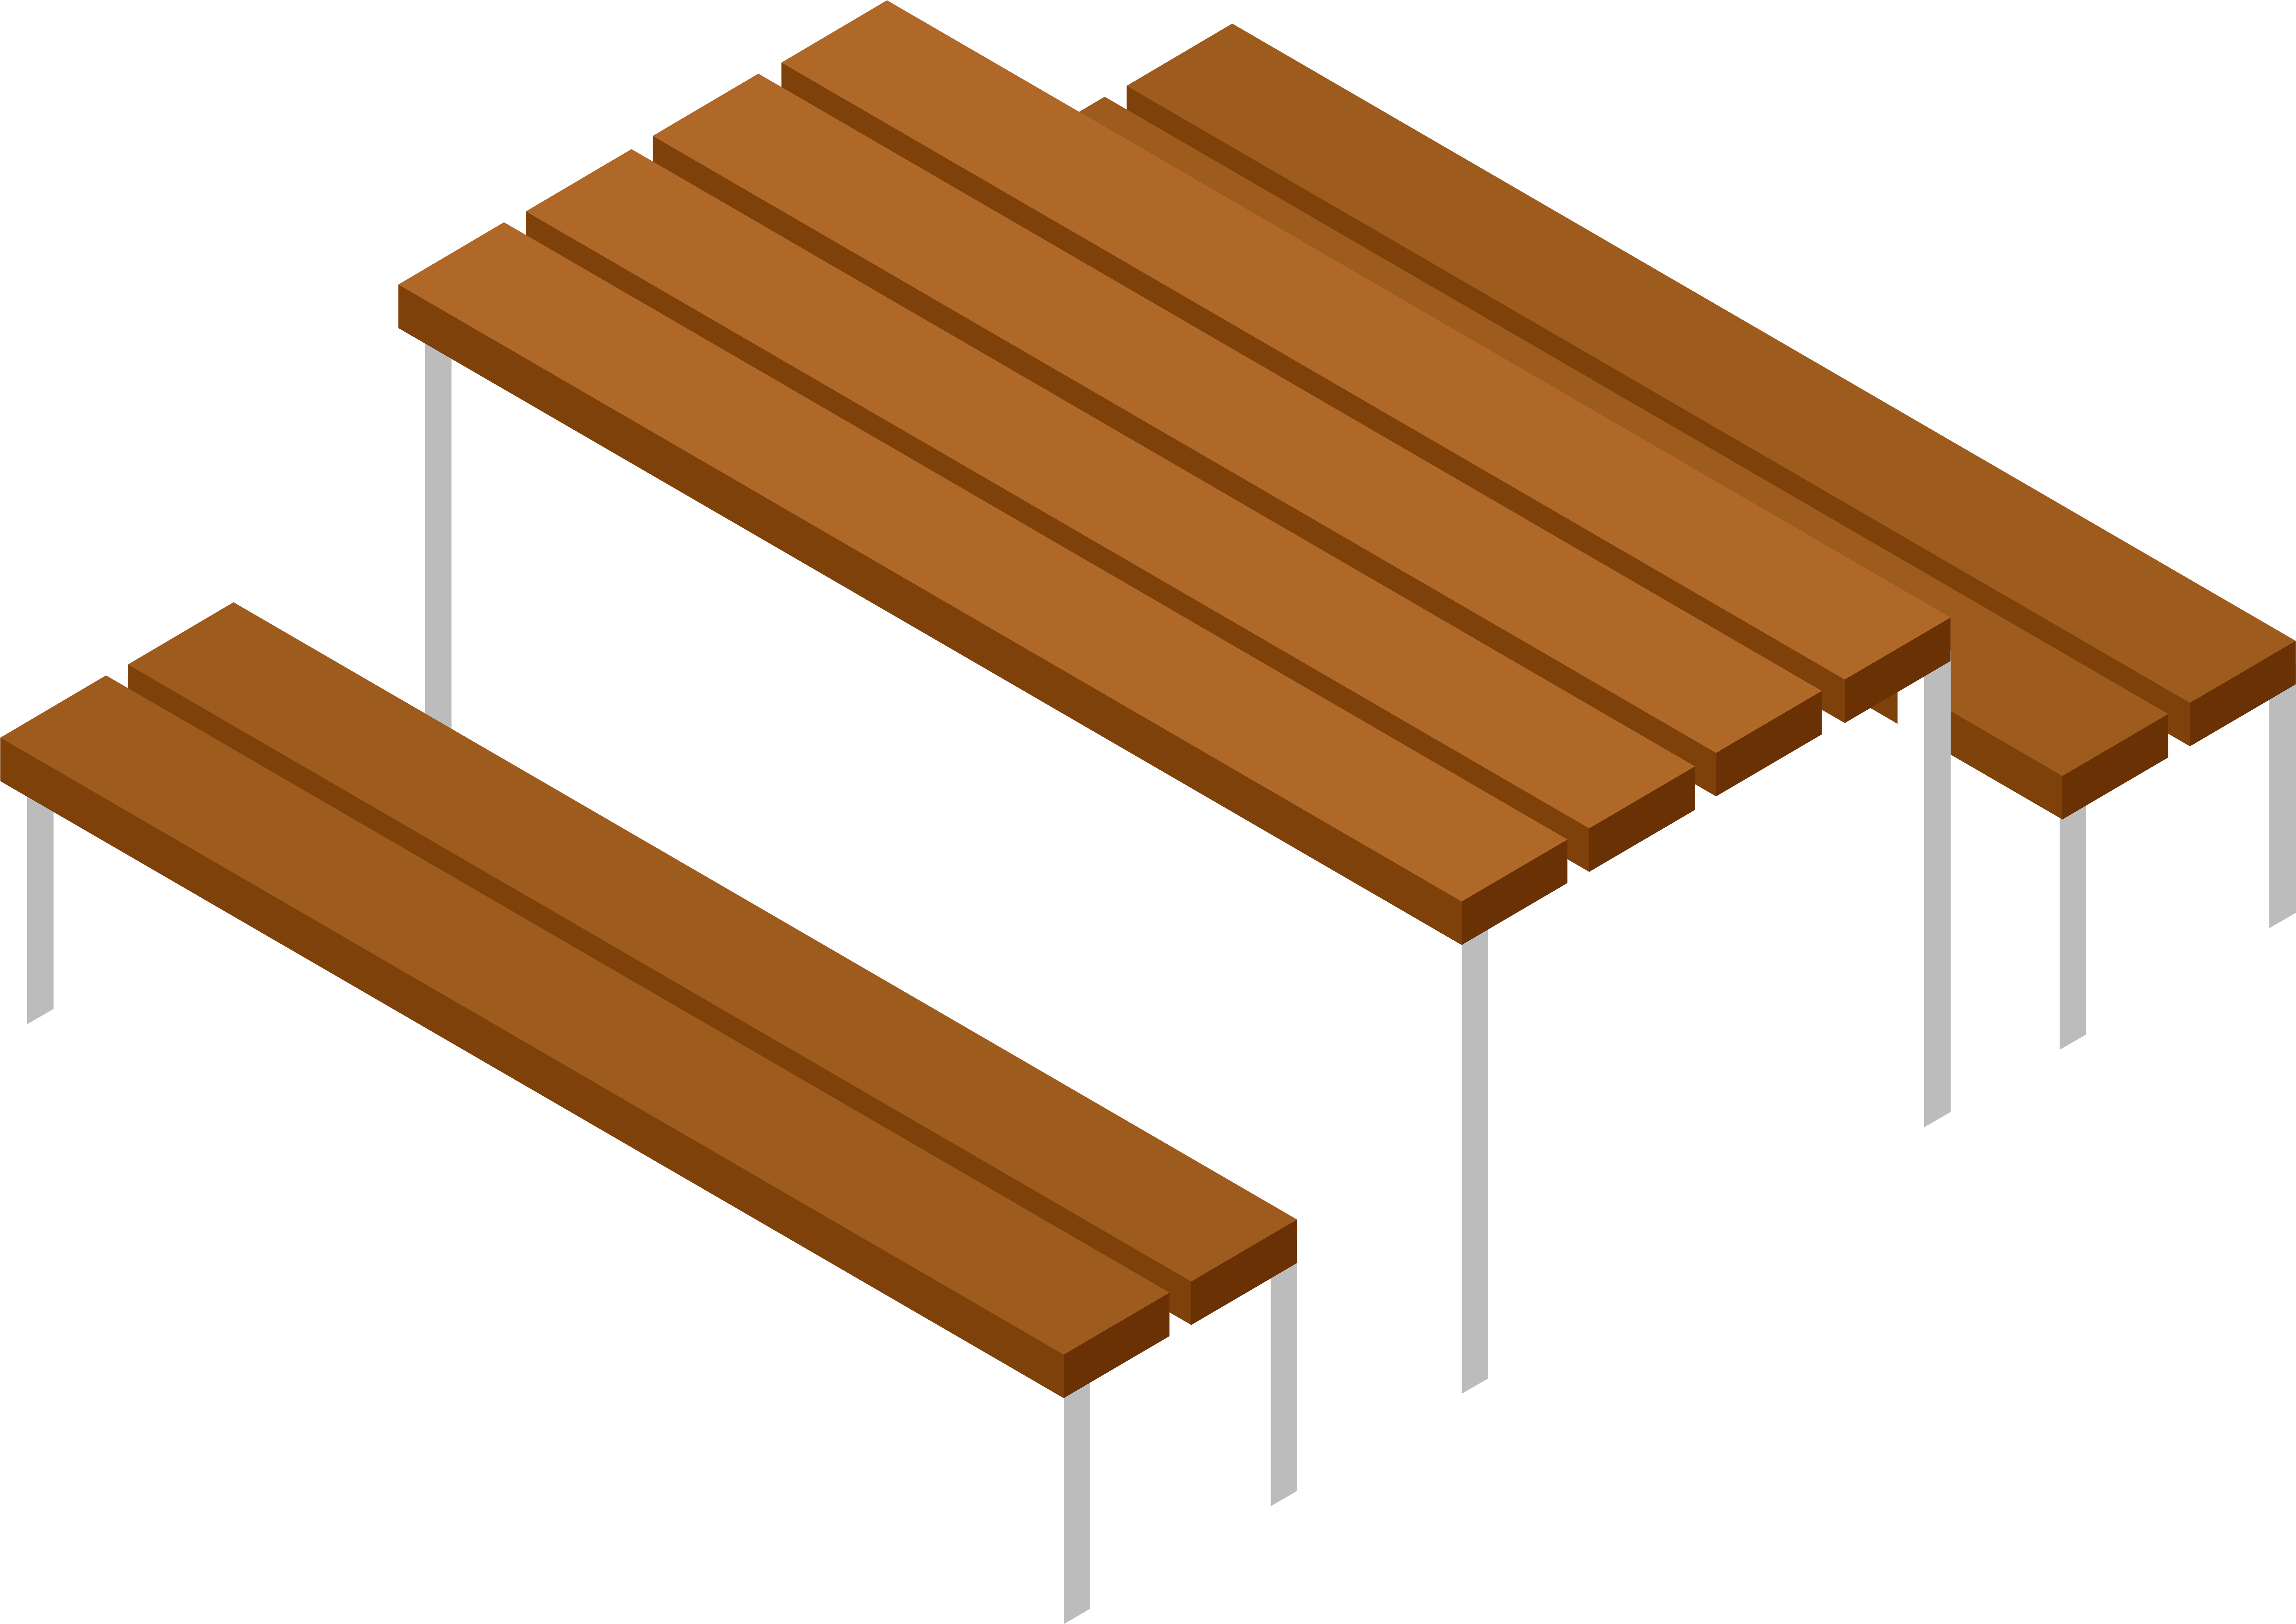 A Table And Benches On A Black Background